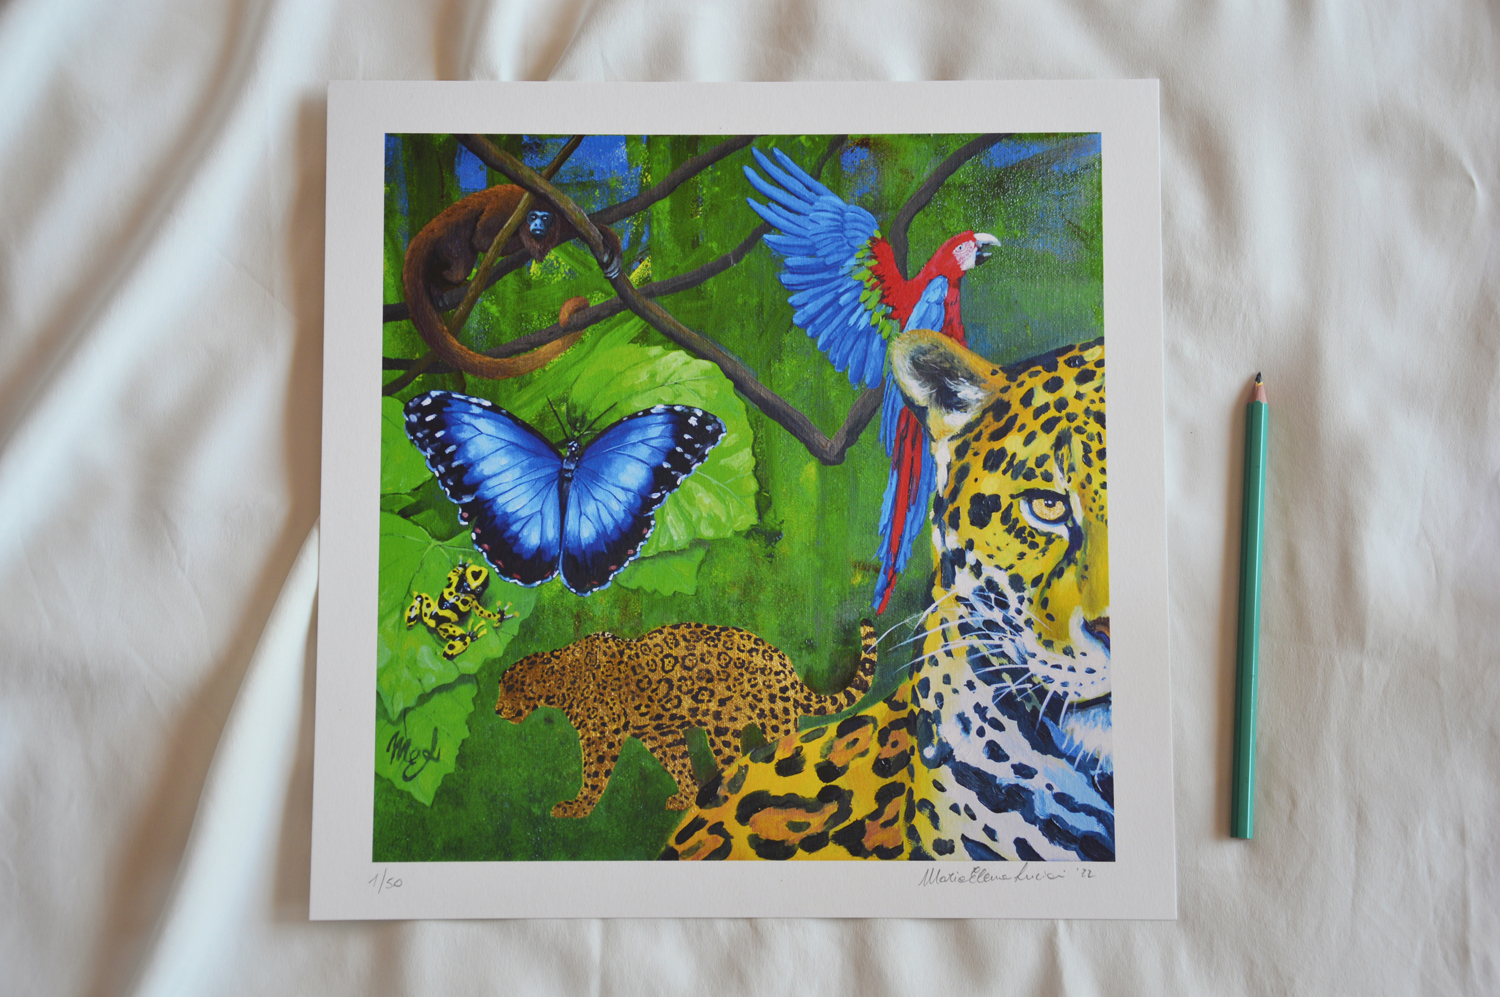 Amazonian Forest, giclee print